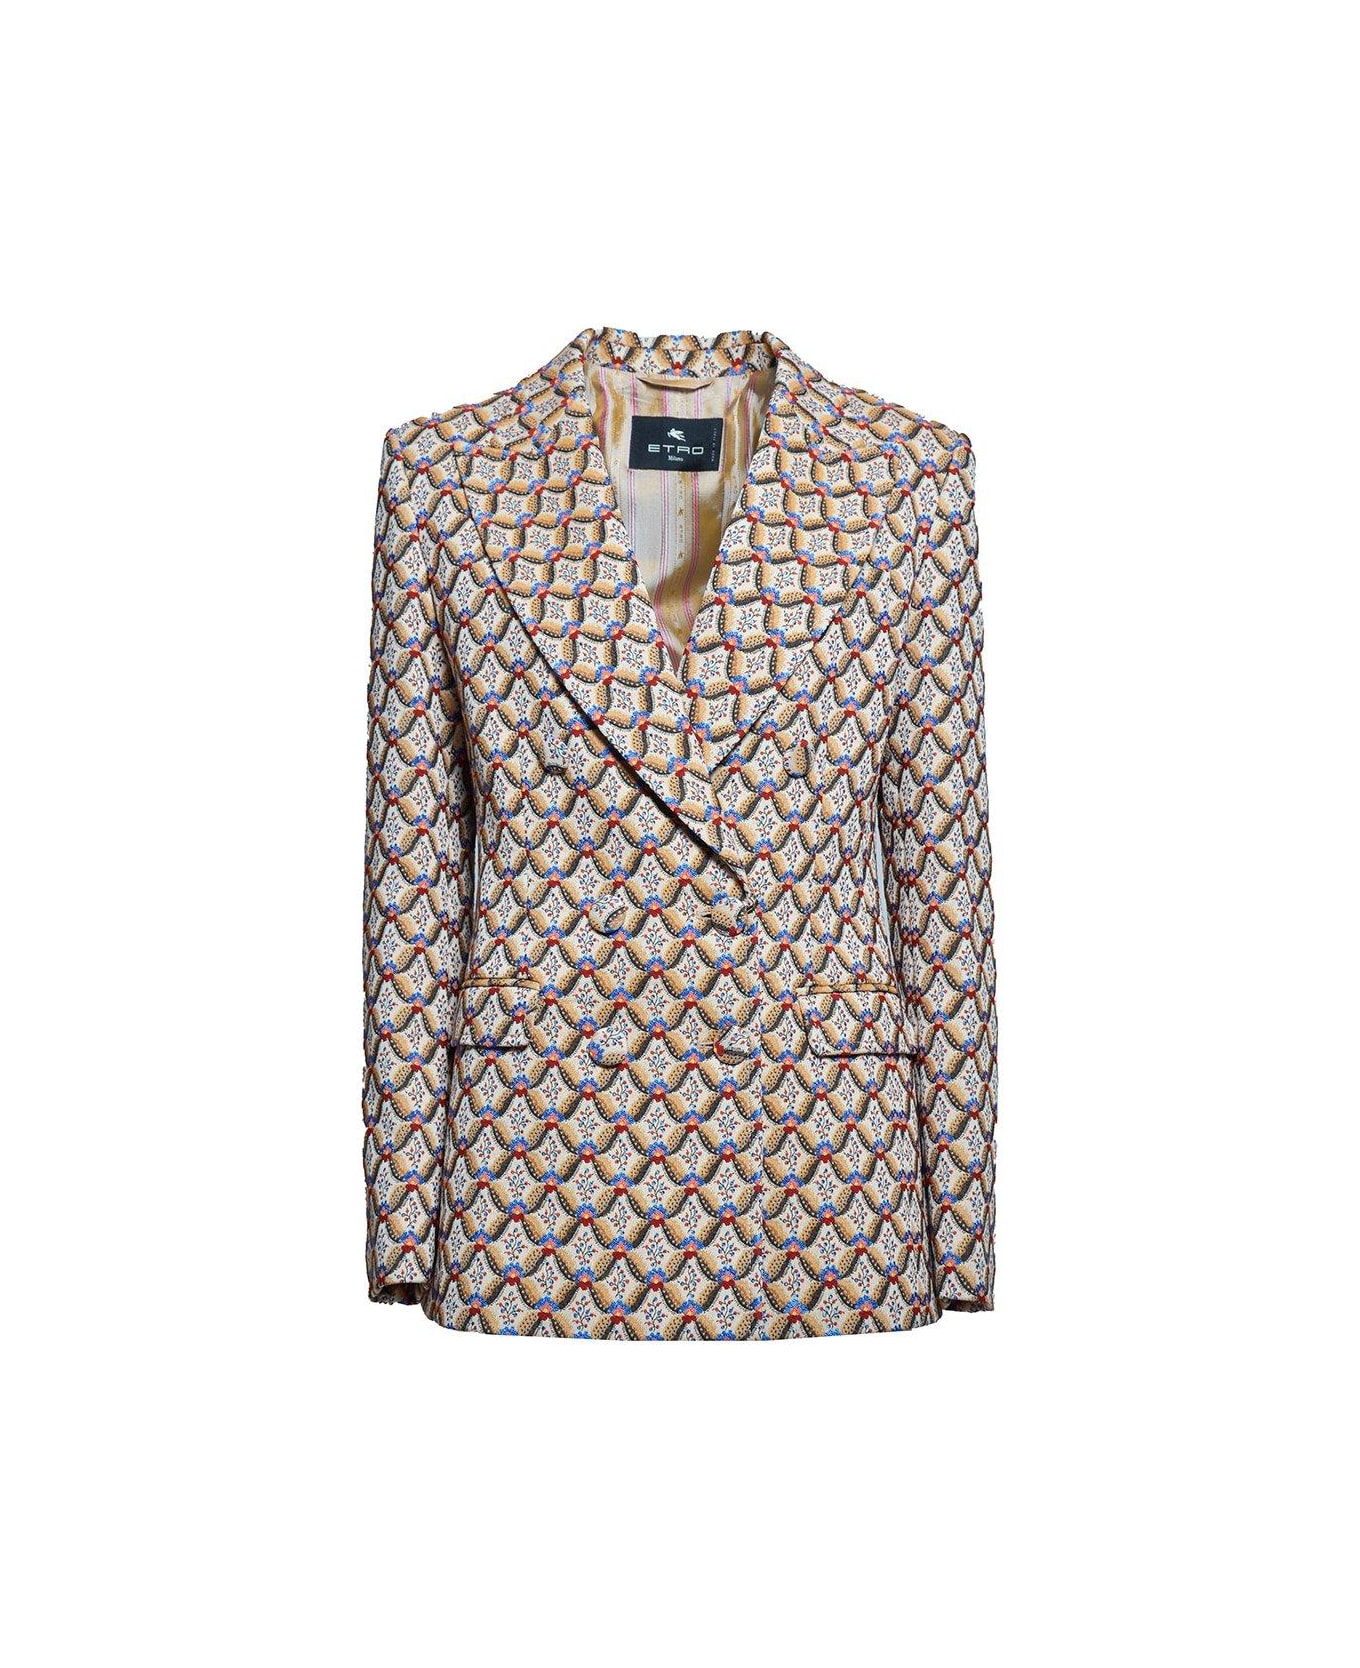 Etro Pattern Jacquard Double-breasted Jacket - Multicolour ブレザー